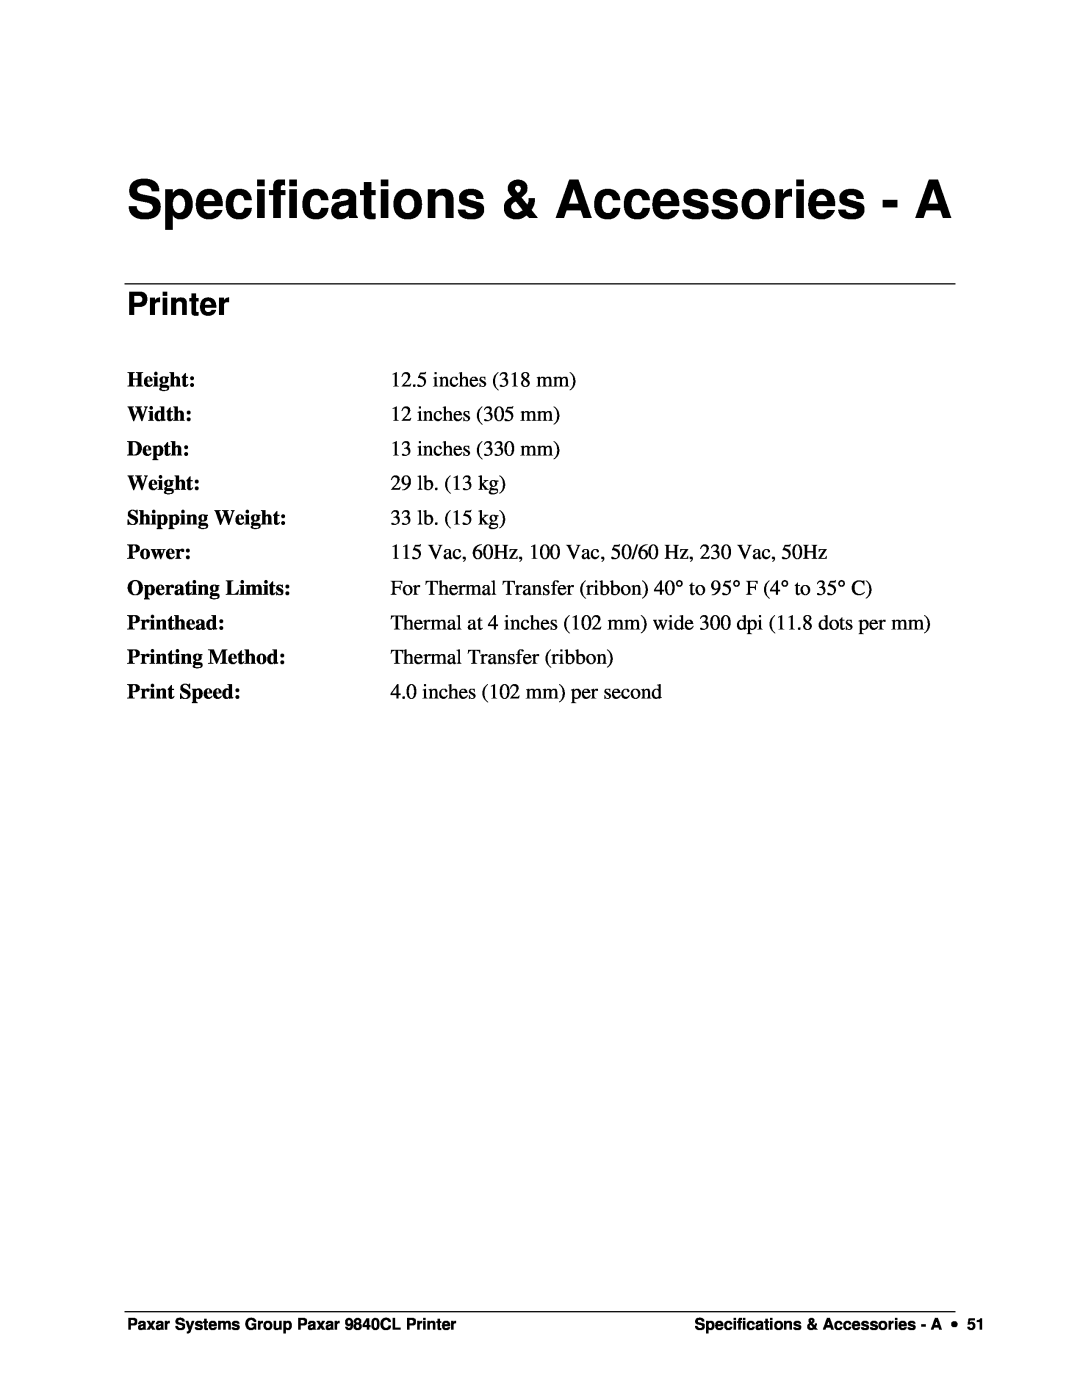 Paxar 9840CL user manual Specifications & Accessories - A, Printer 